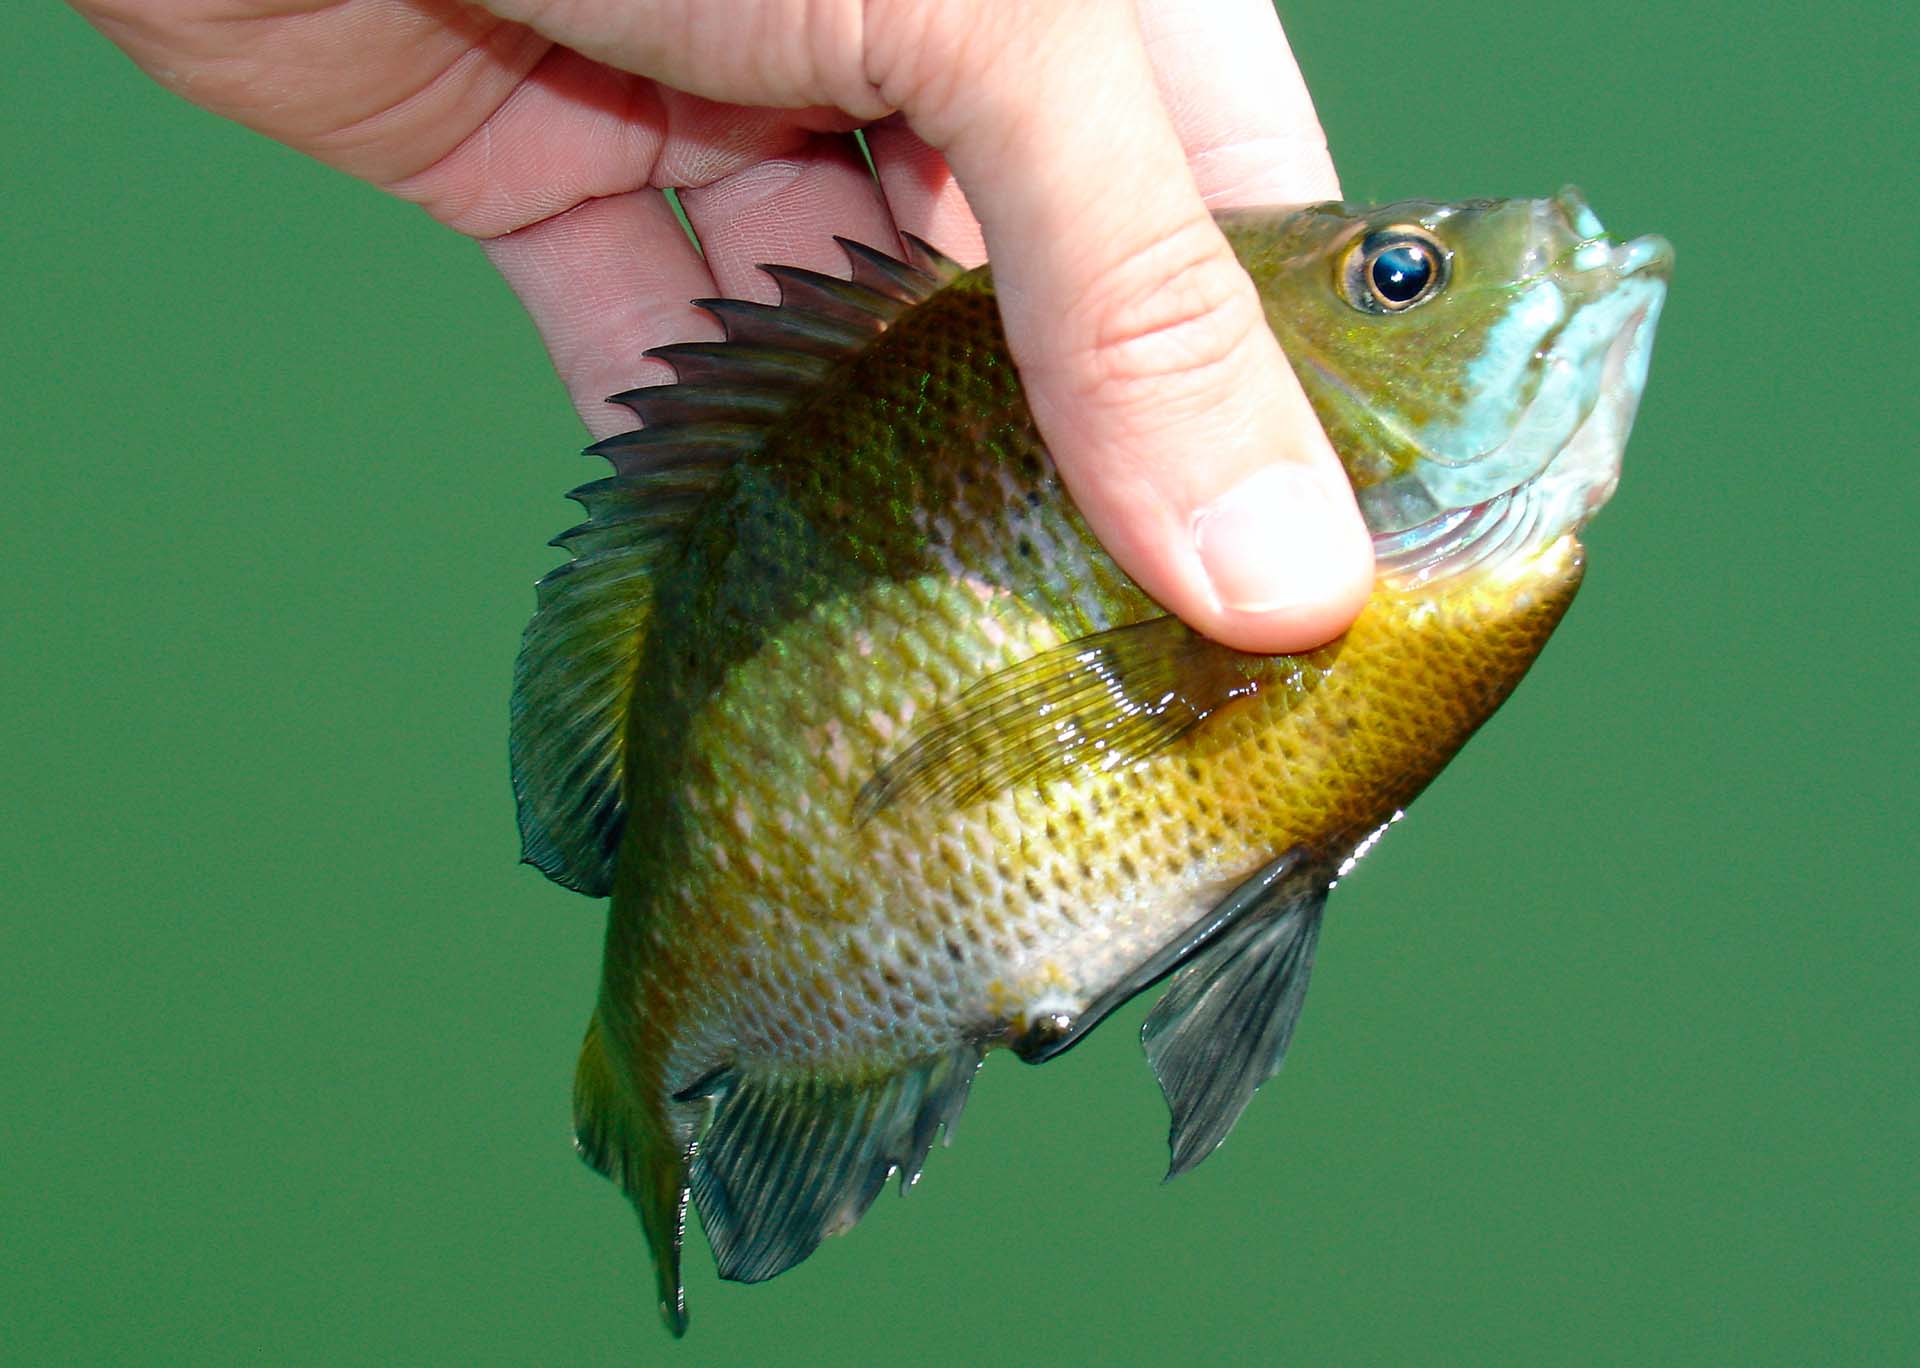 A person holding a panfish